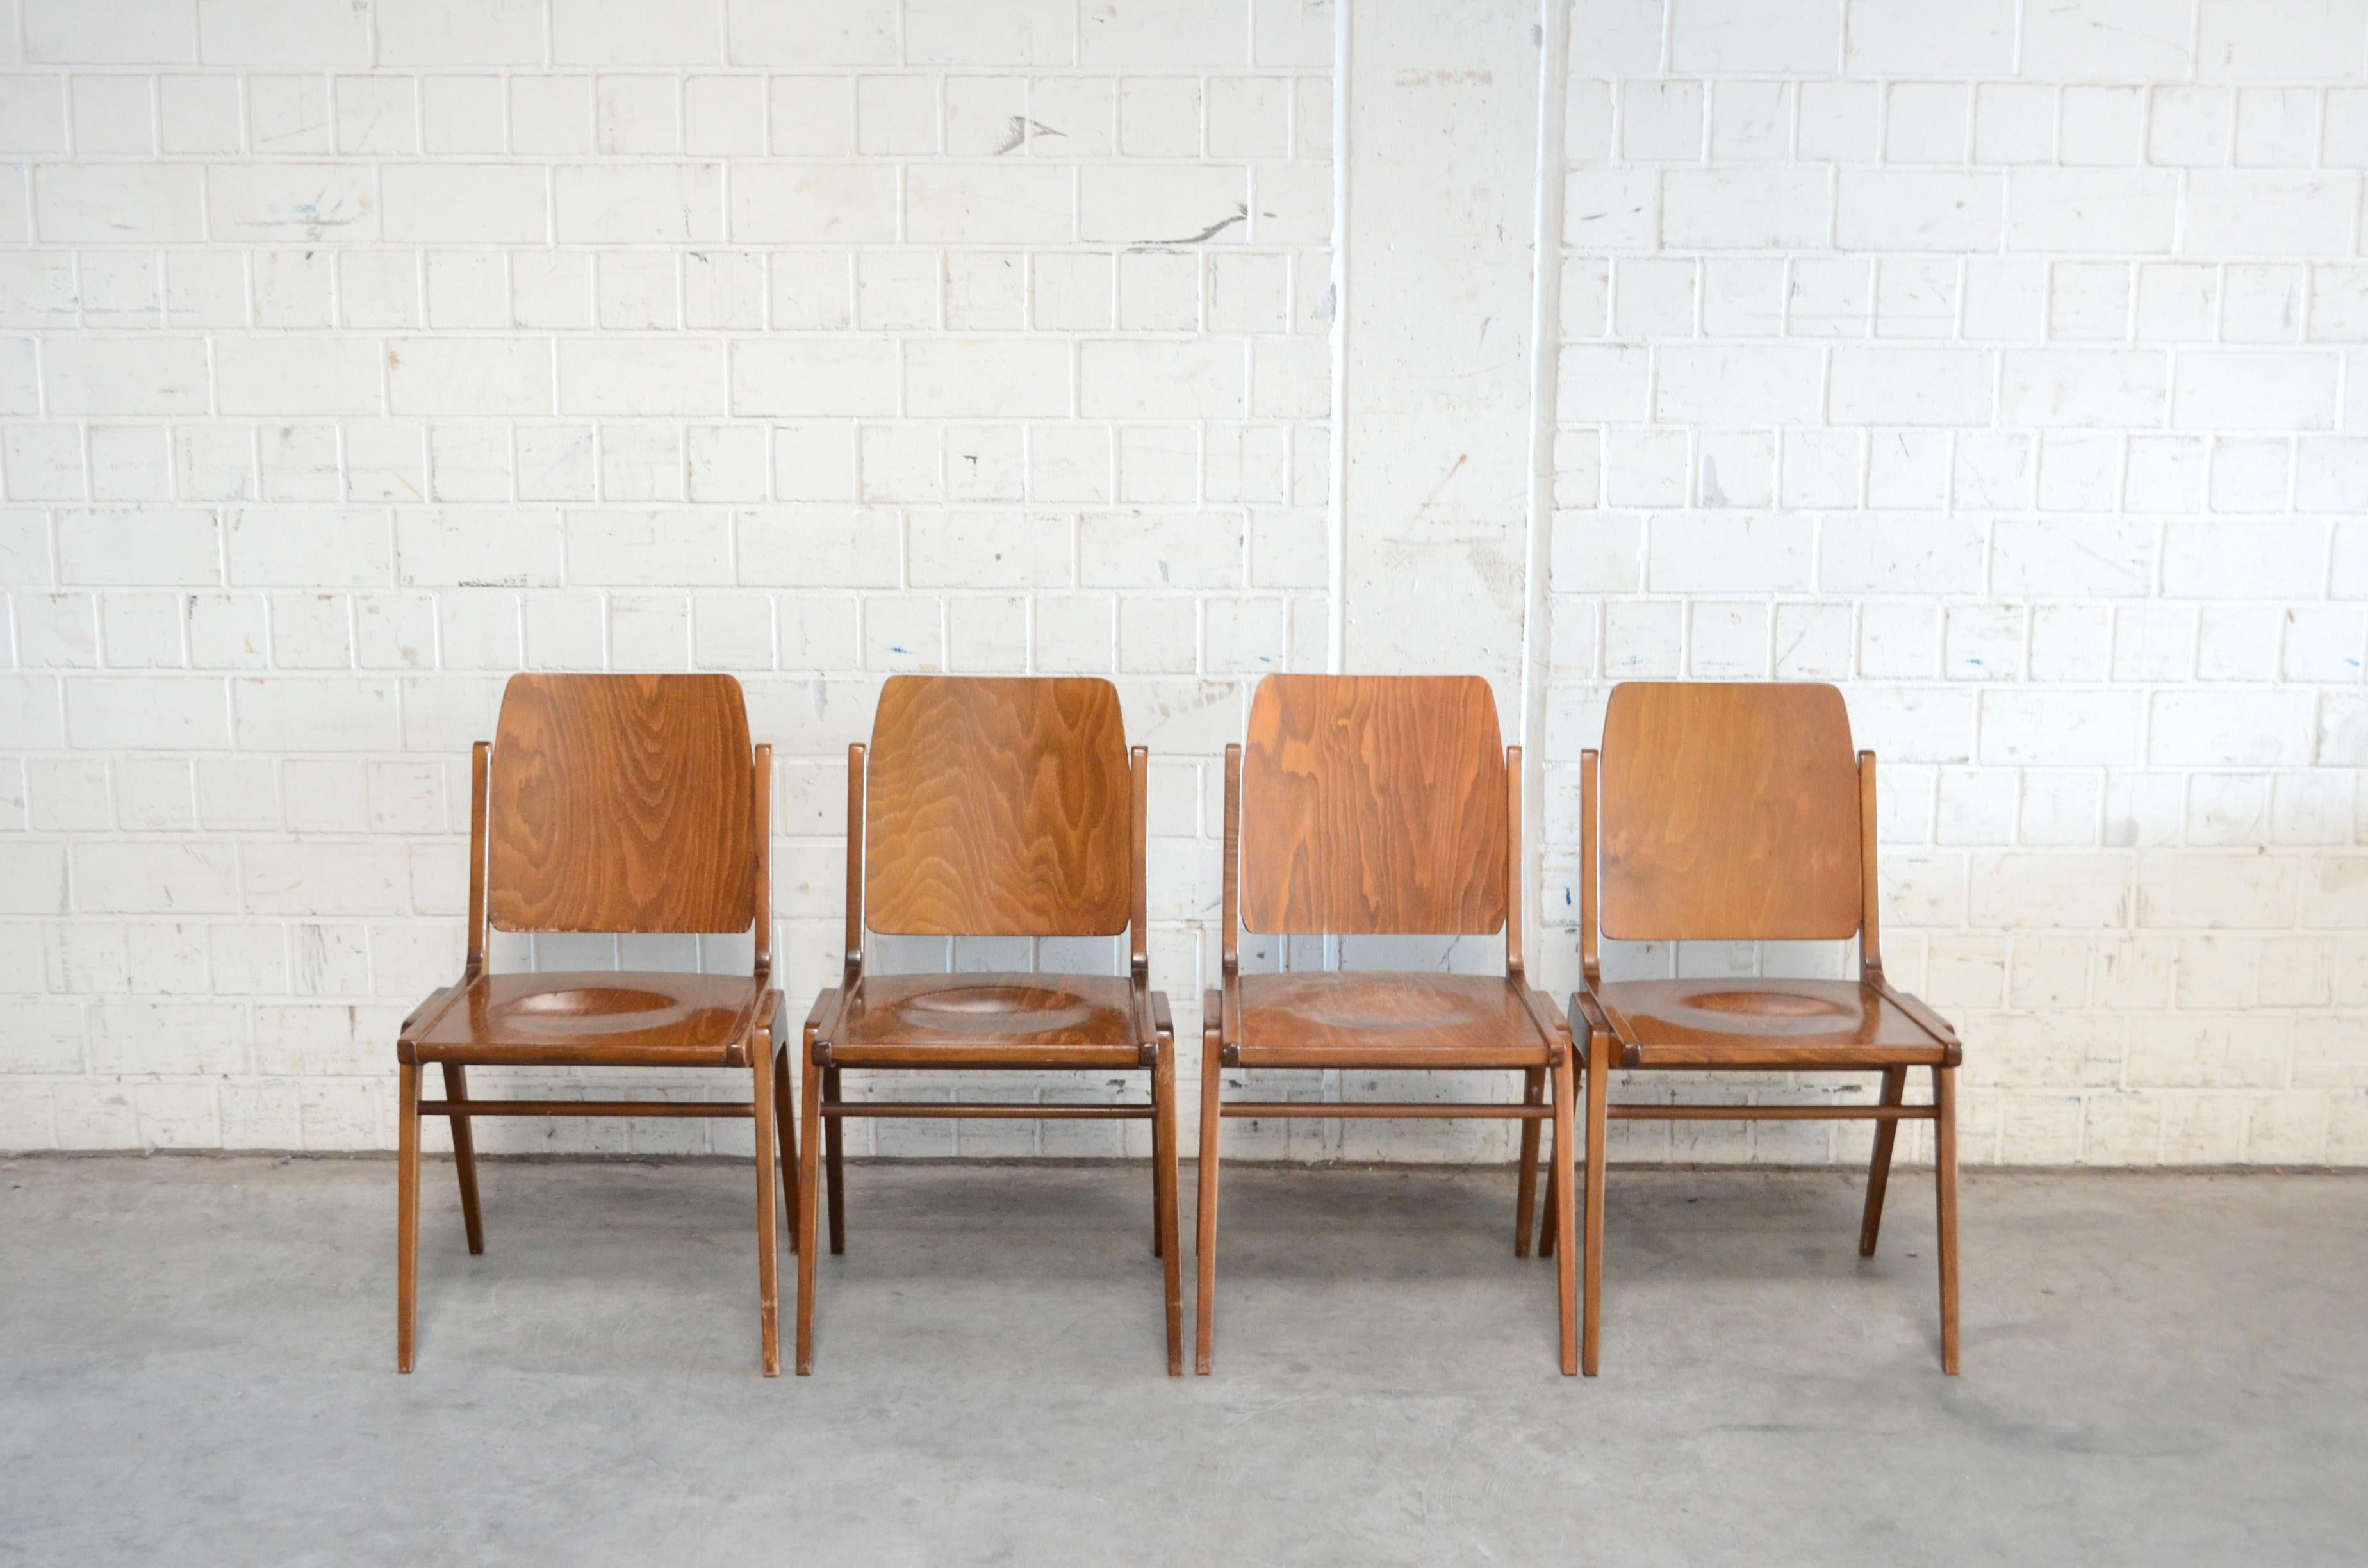 Mid-Century Modern 4 Set of Original Austro Chairs by Franz Schuster for Wiesner Hager Austria 1959 For Sale